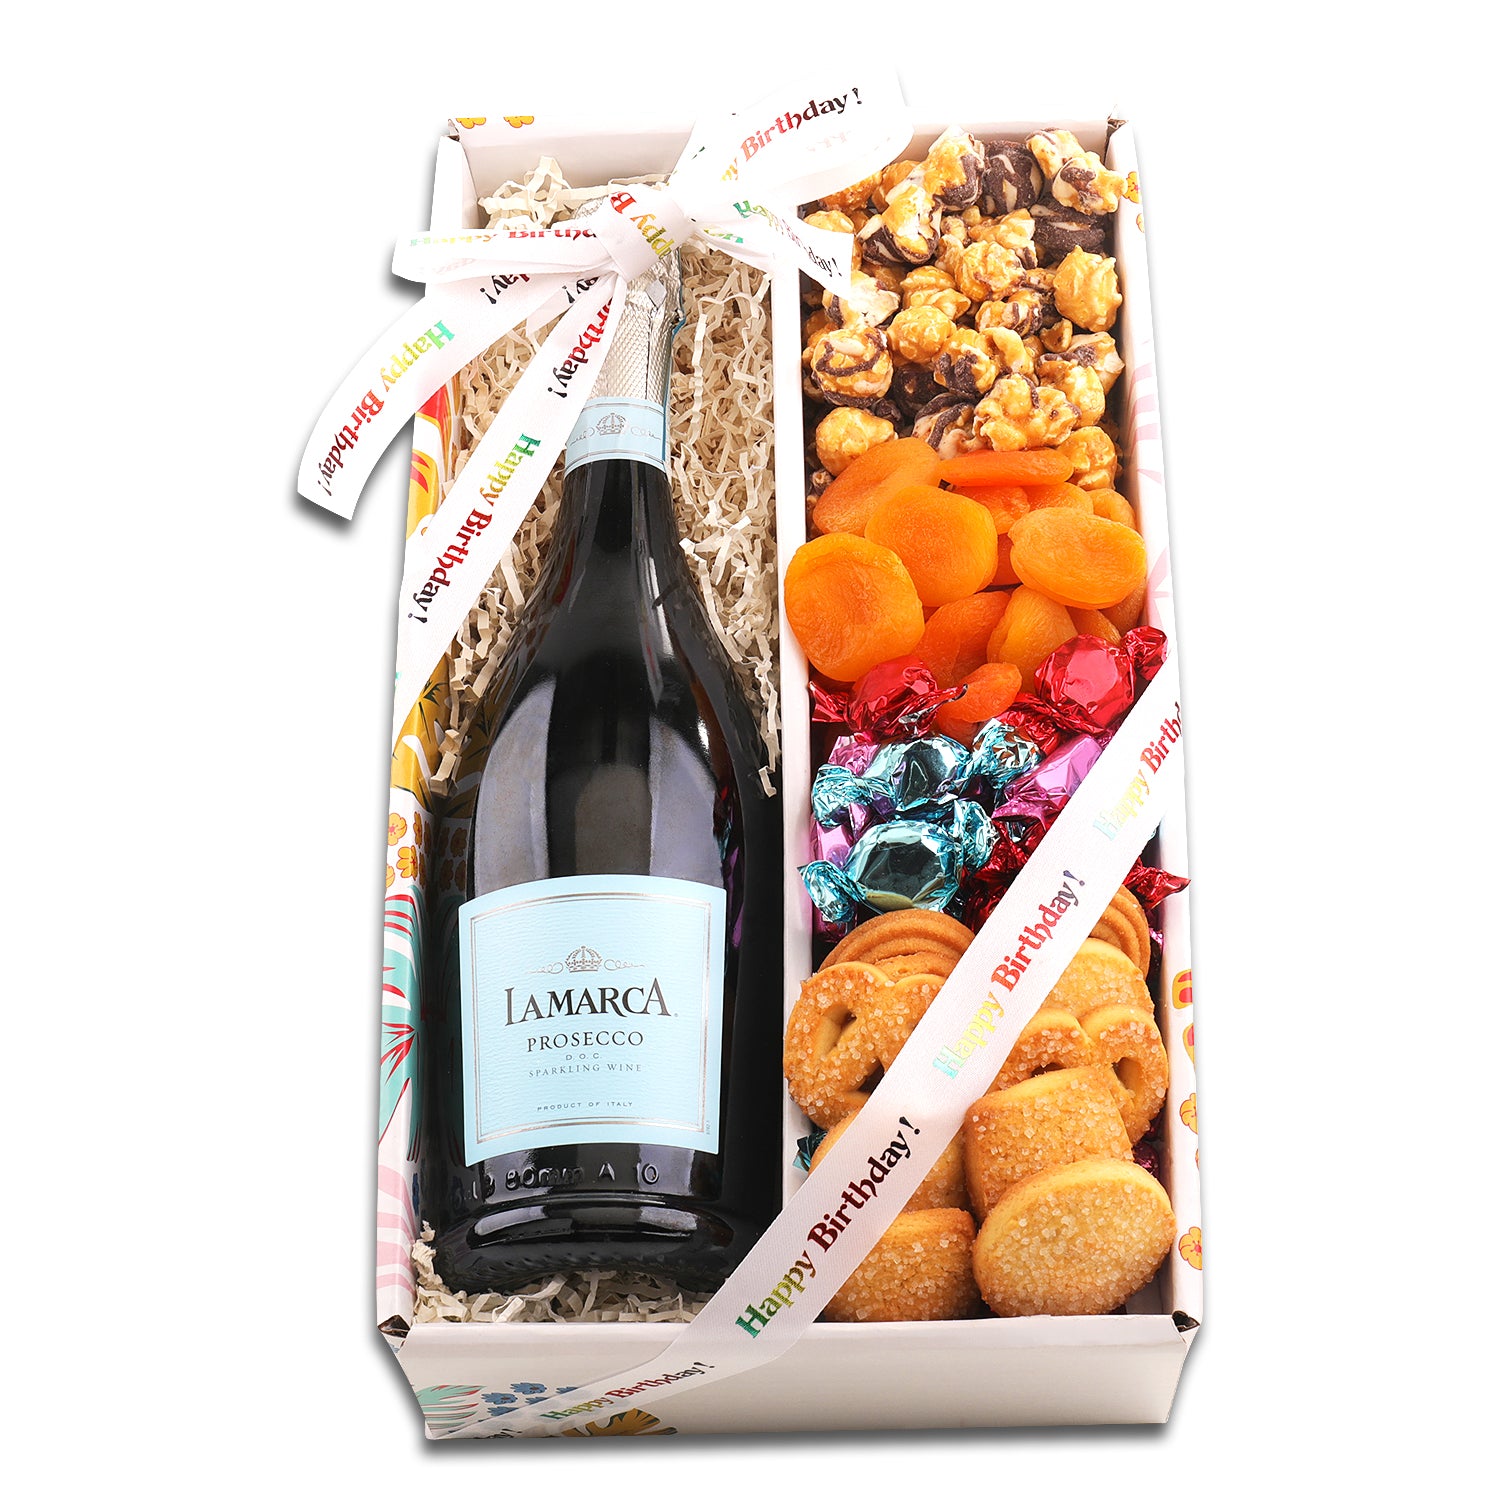 Lamarca Prosecco Sparkling Wine, Chocolate drizzled sea salt popcorn, Turkish Apricots, Button hard candies, and deliciously sweet butter cookies inside a decorative cardboard box